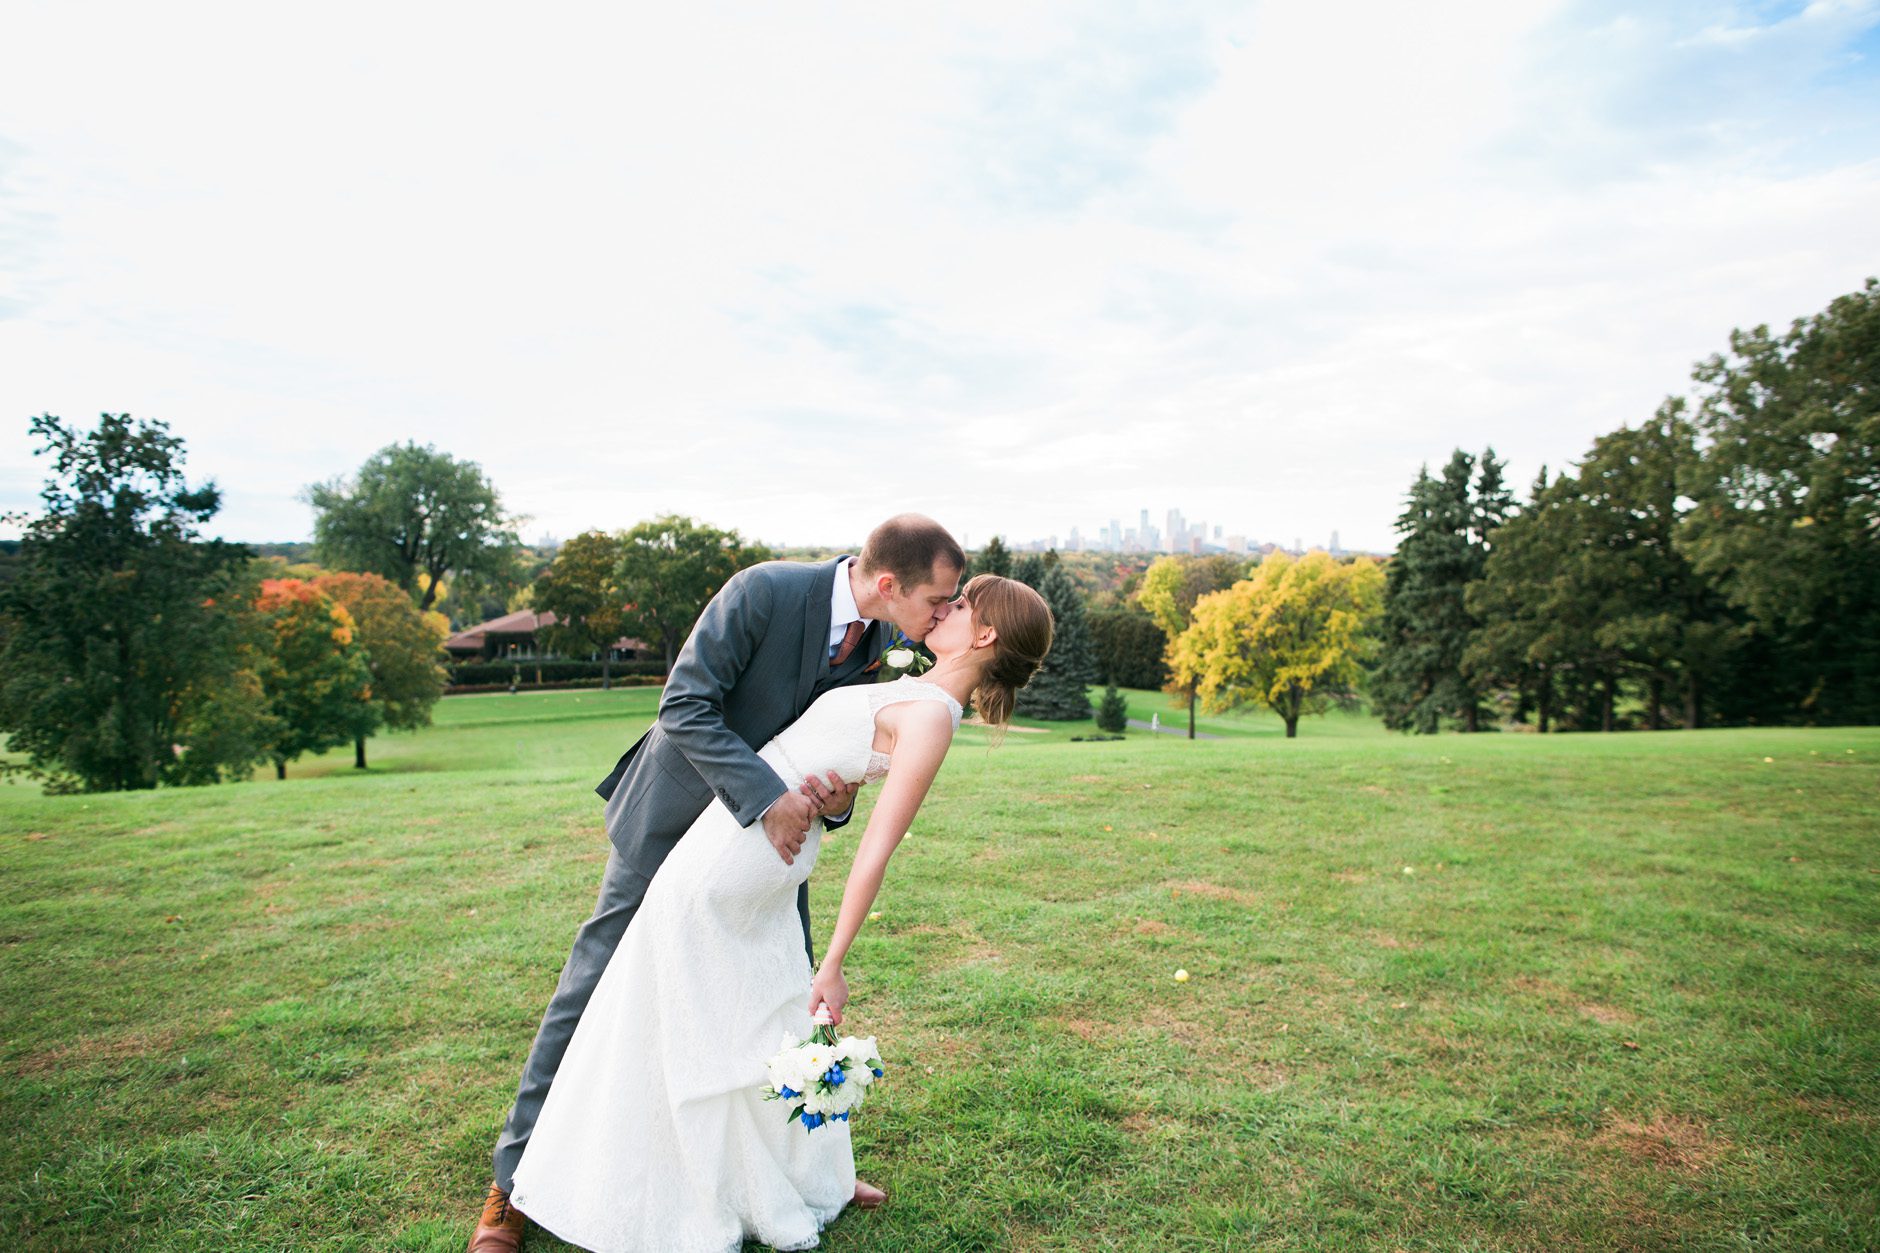 eileenkphoto-wedding-town-and-country-club-5482